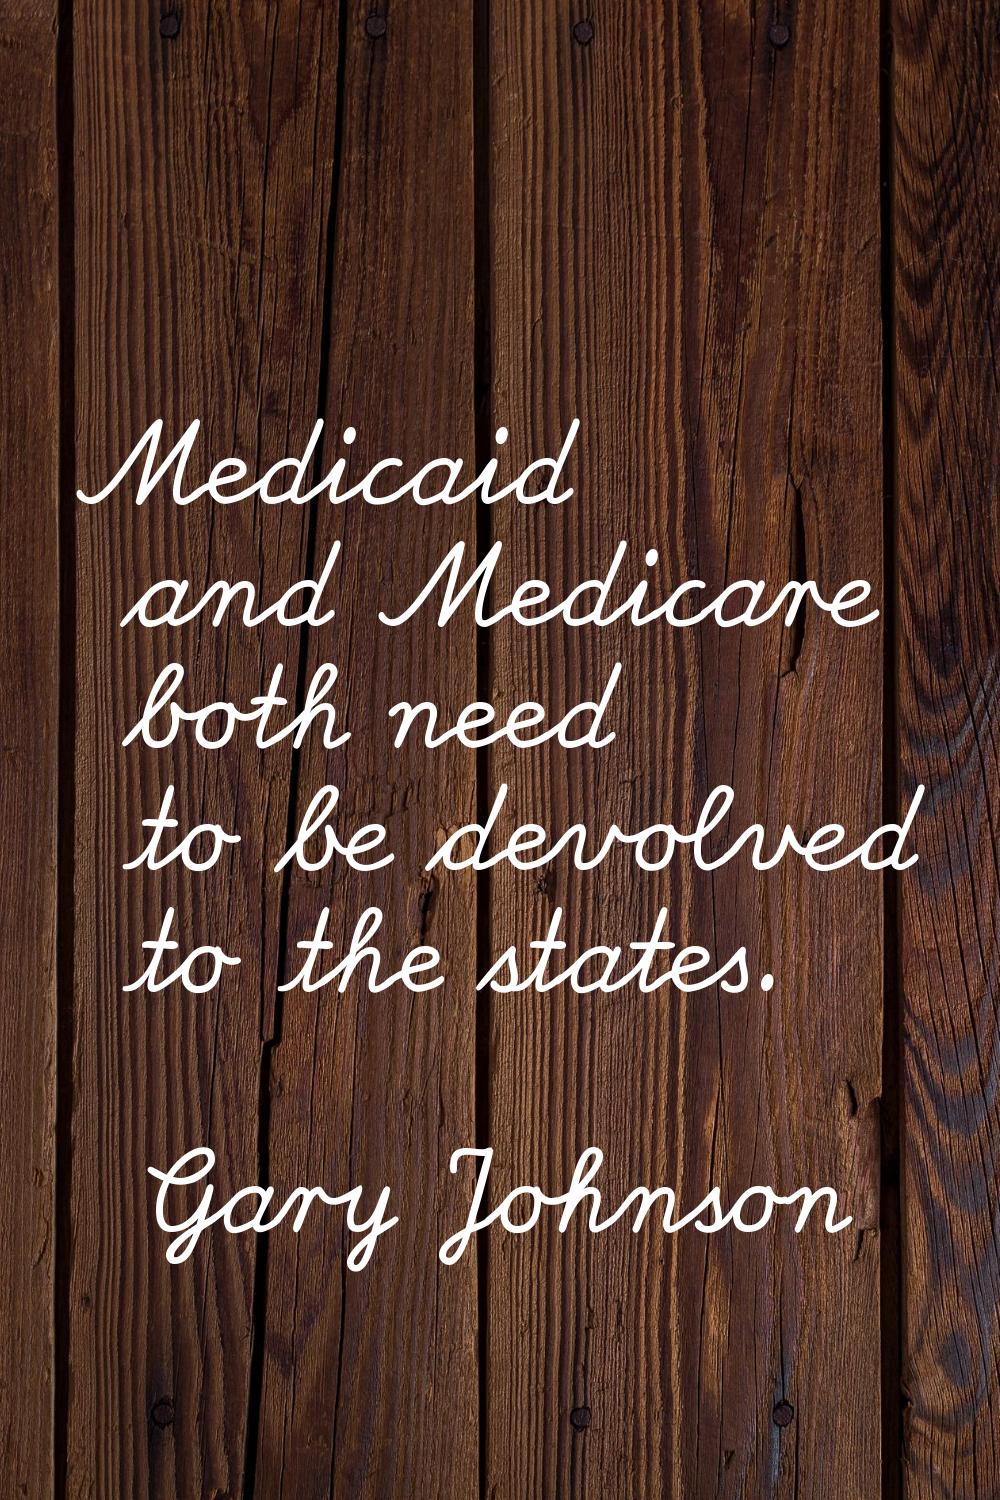 Medicaid and Medicare both need to be devolved to the states.